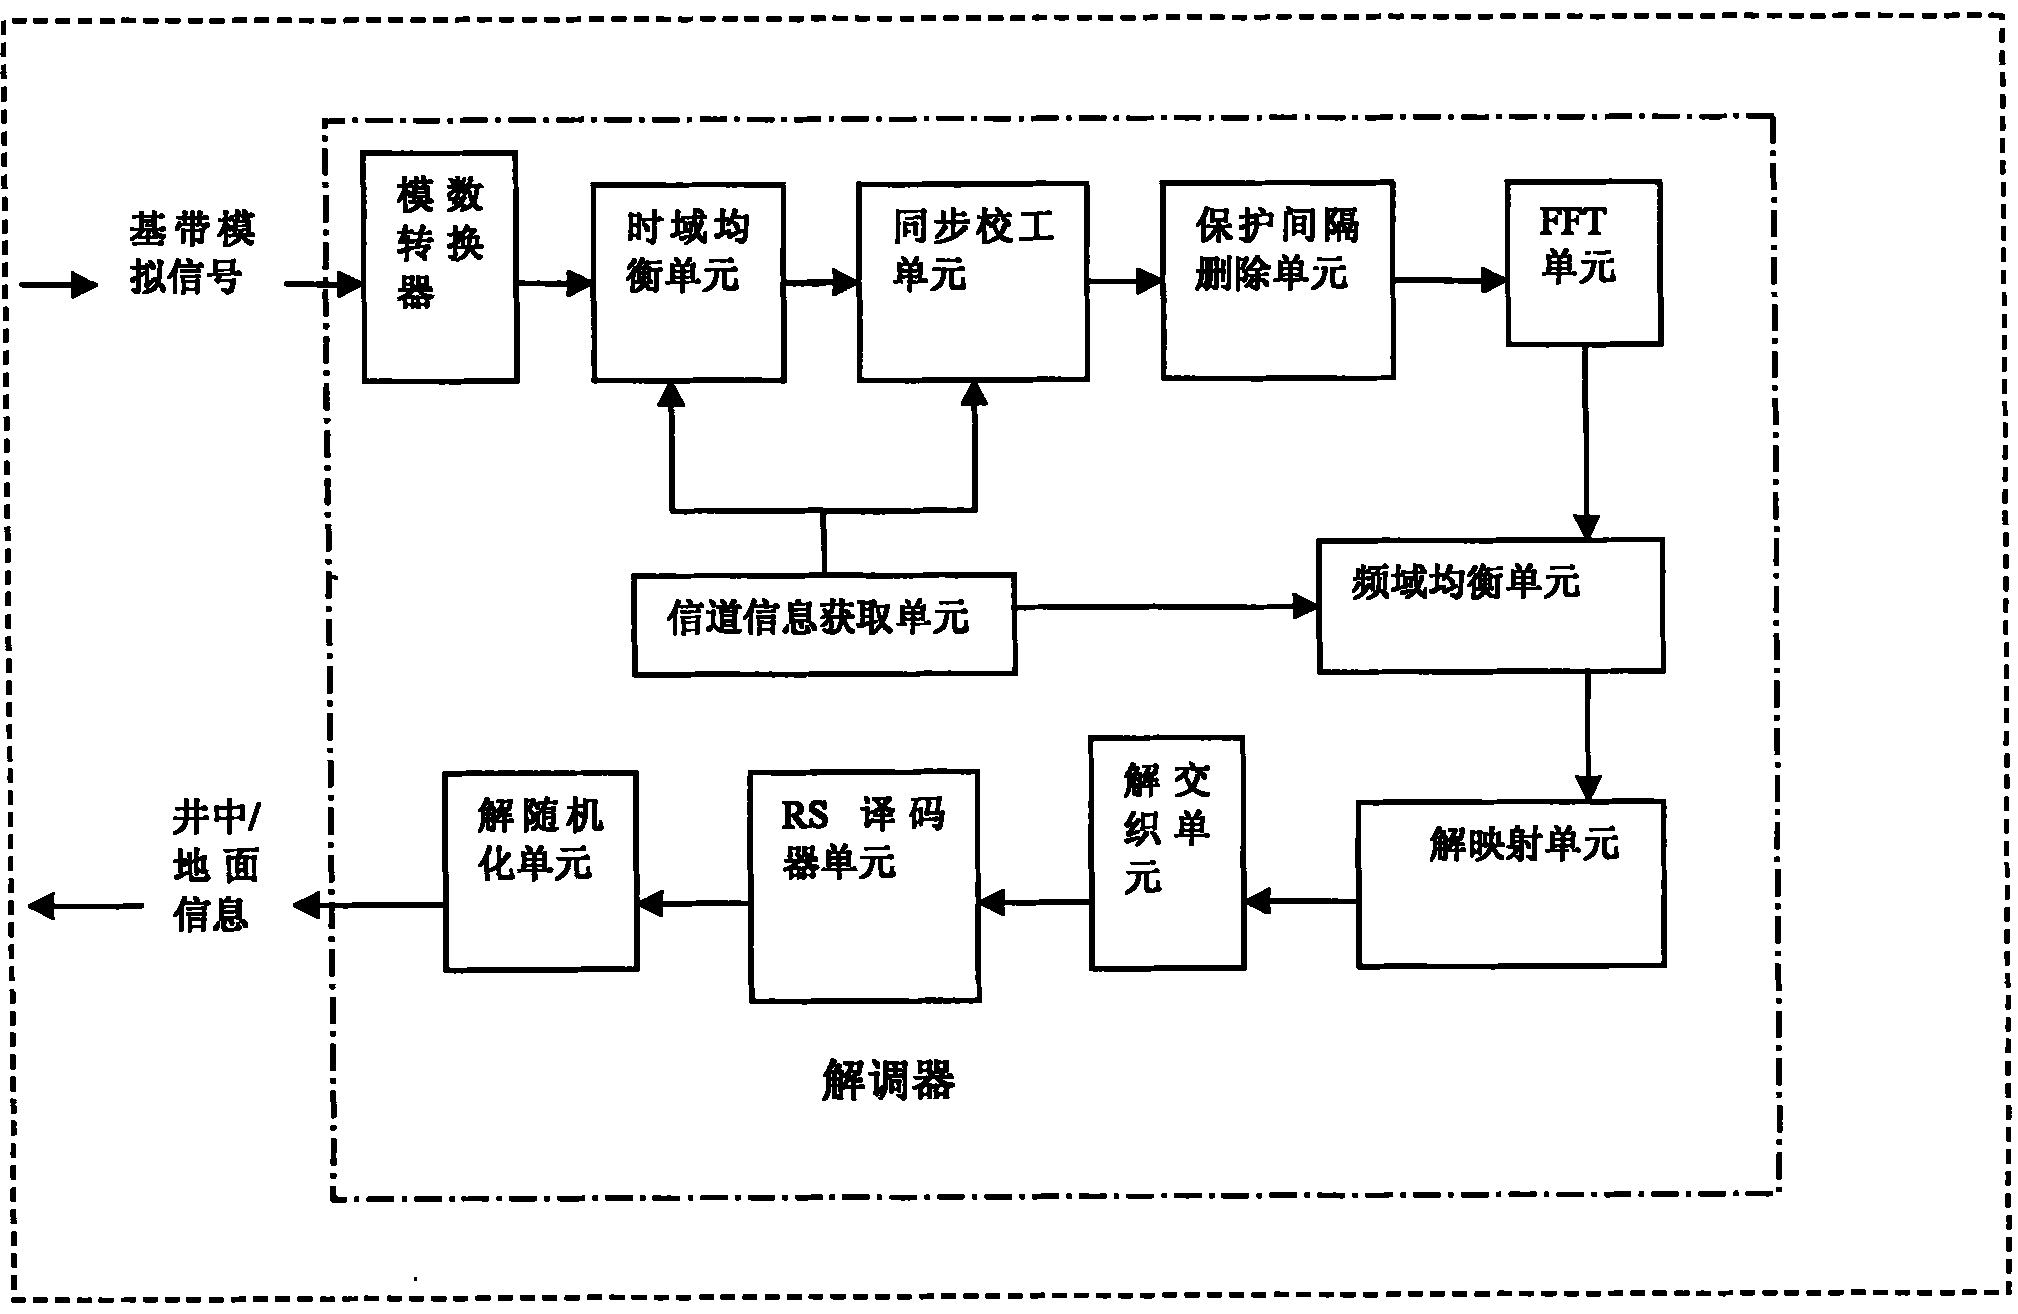 Method and device for high-speed wired duplexing information communication between well and ground